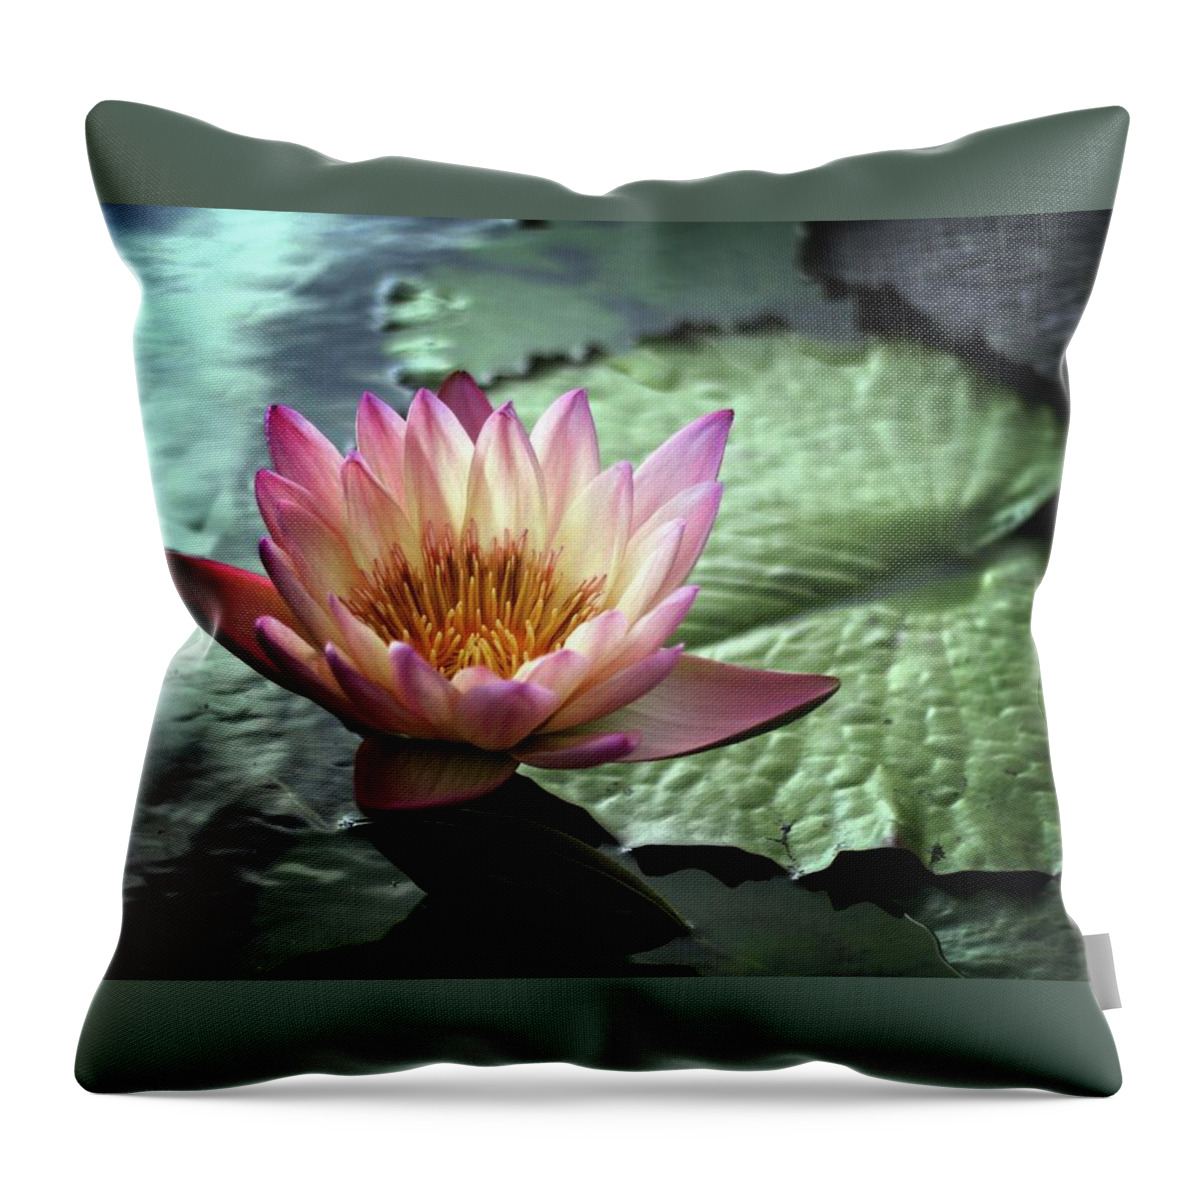 Lily Throw Pillow featuring the photograph Twilight Lily by Jessica Jenney